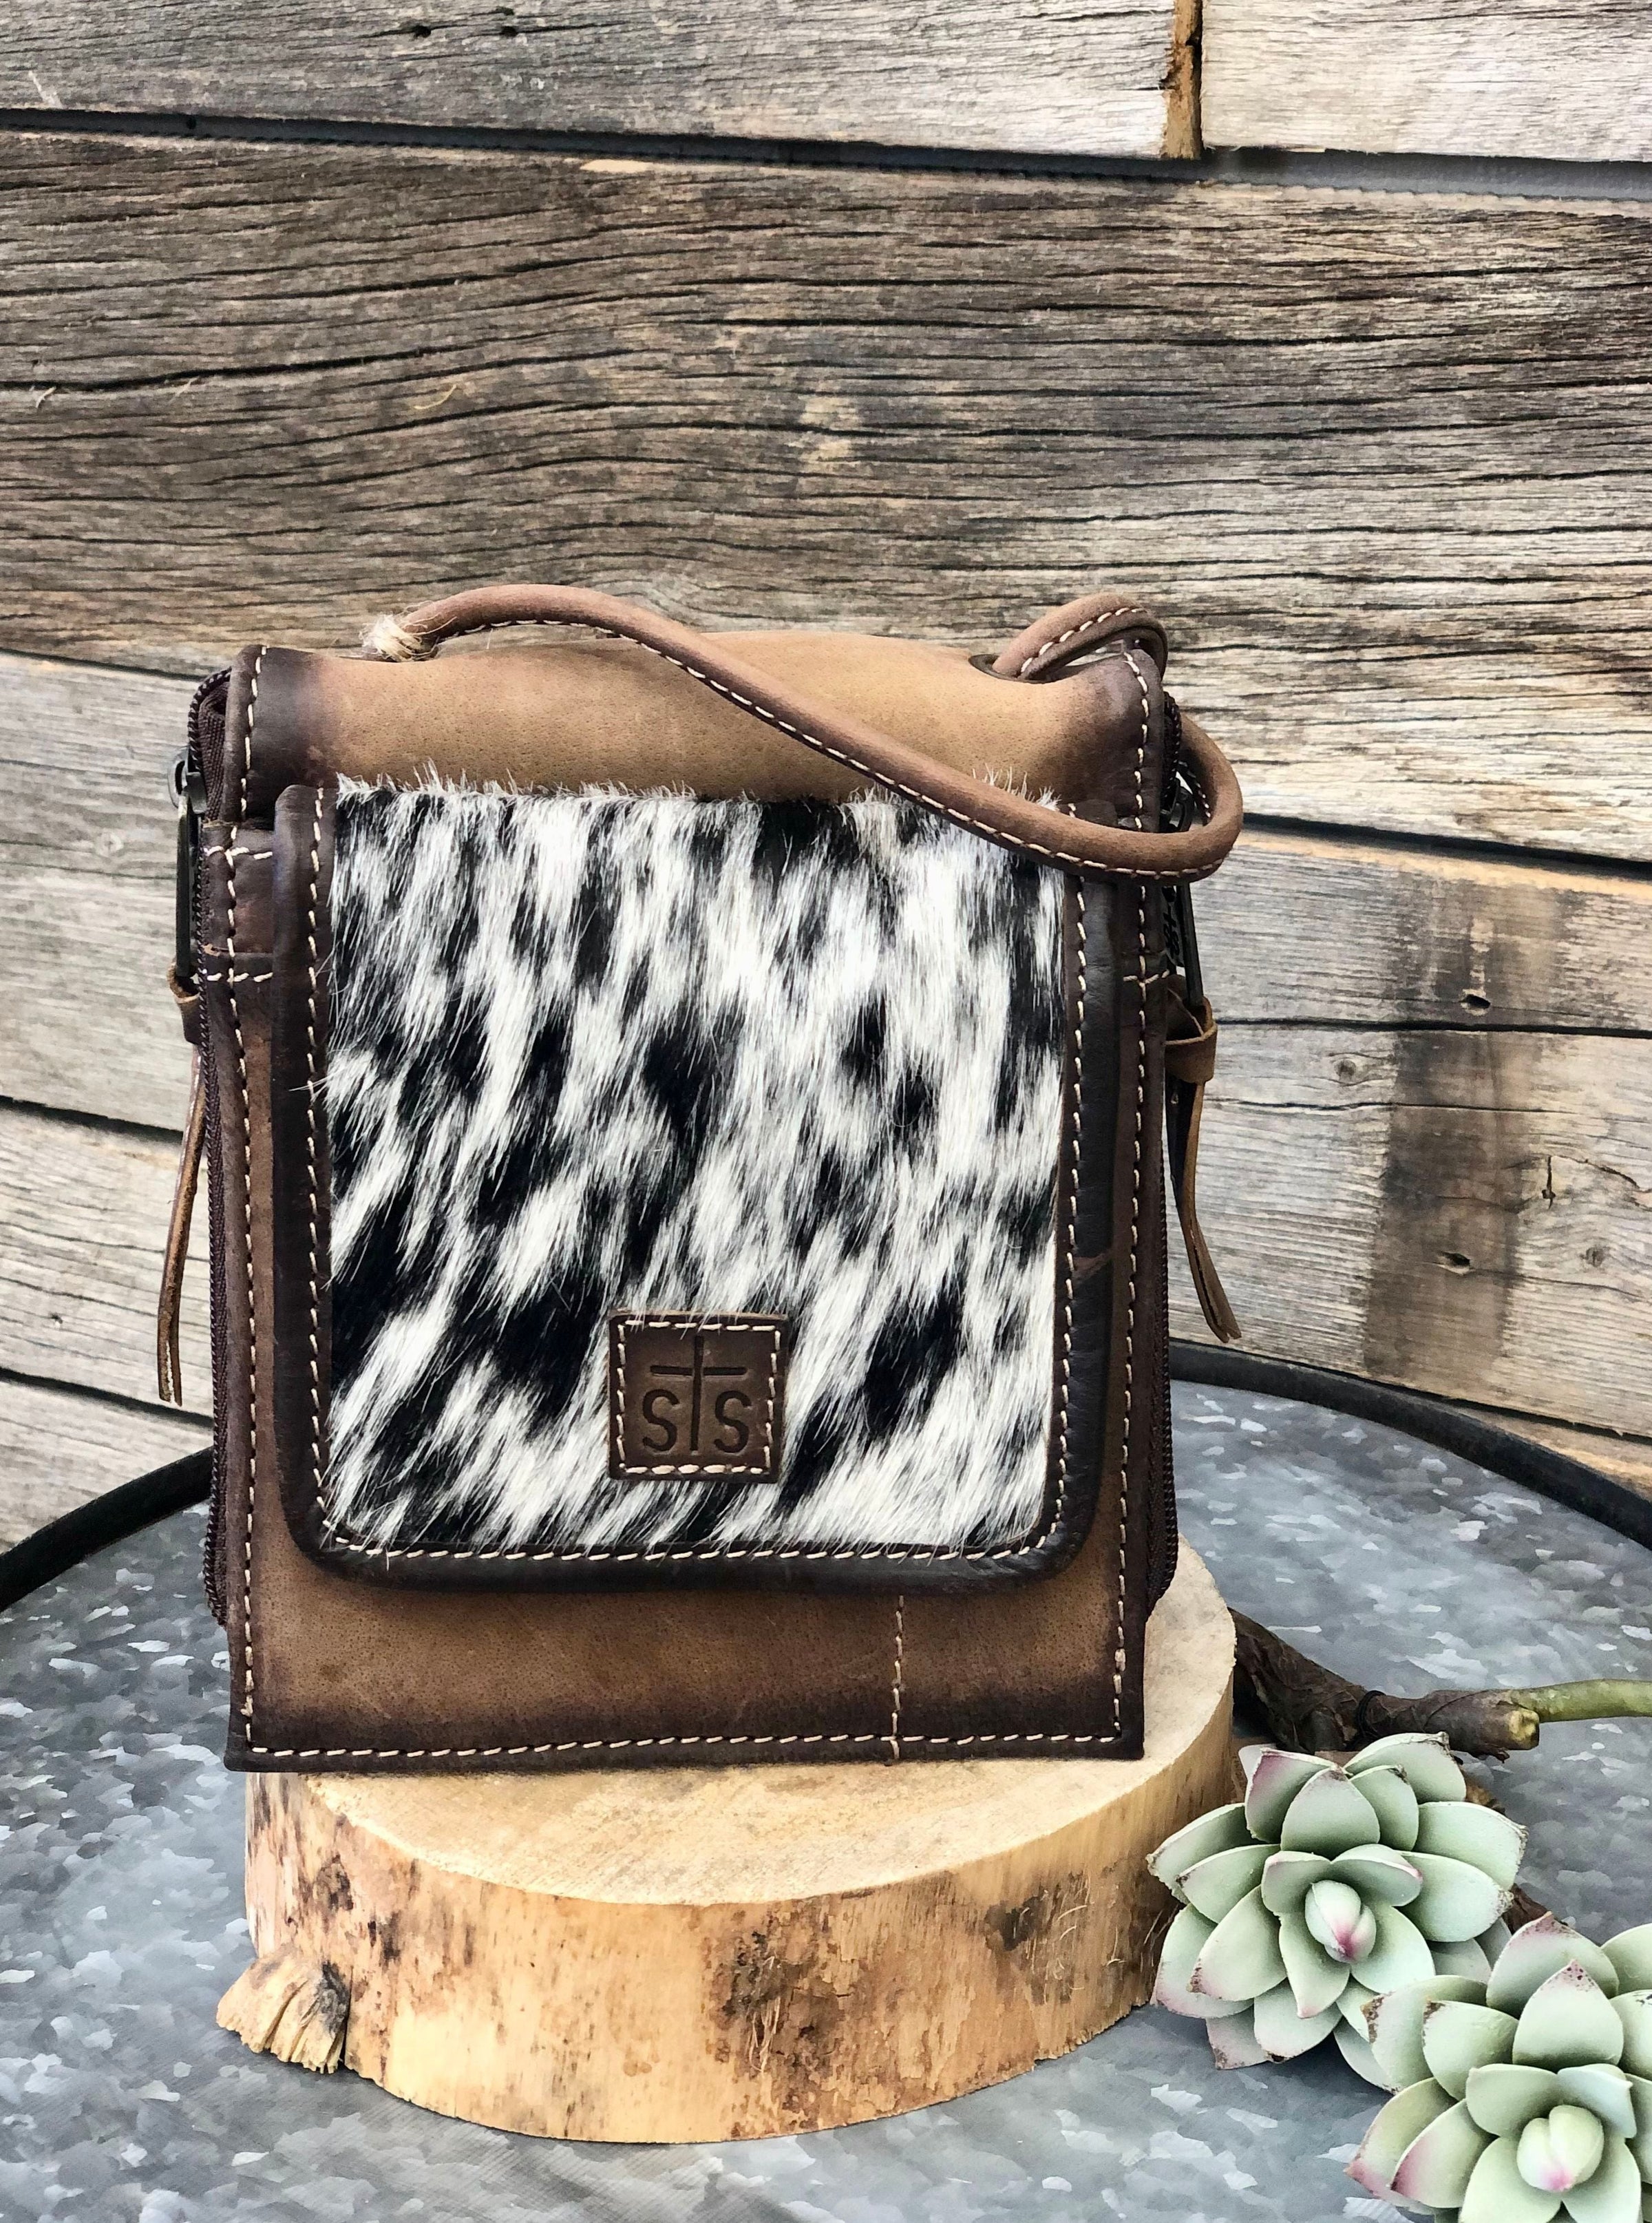 Lammle's Western Wear - STS Ranchwear Women's Cowhide Baroness Crossbody  Purse. ' STS was created to meet the needs of a true rancher's lifestyle.'  Shop it: lammles.com/collections/womens-accessories-purses-bags/products/sts -ranchwear-womens-cowhide ...